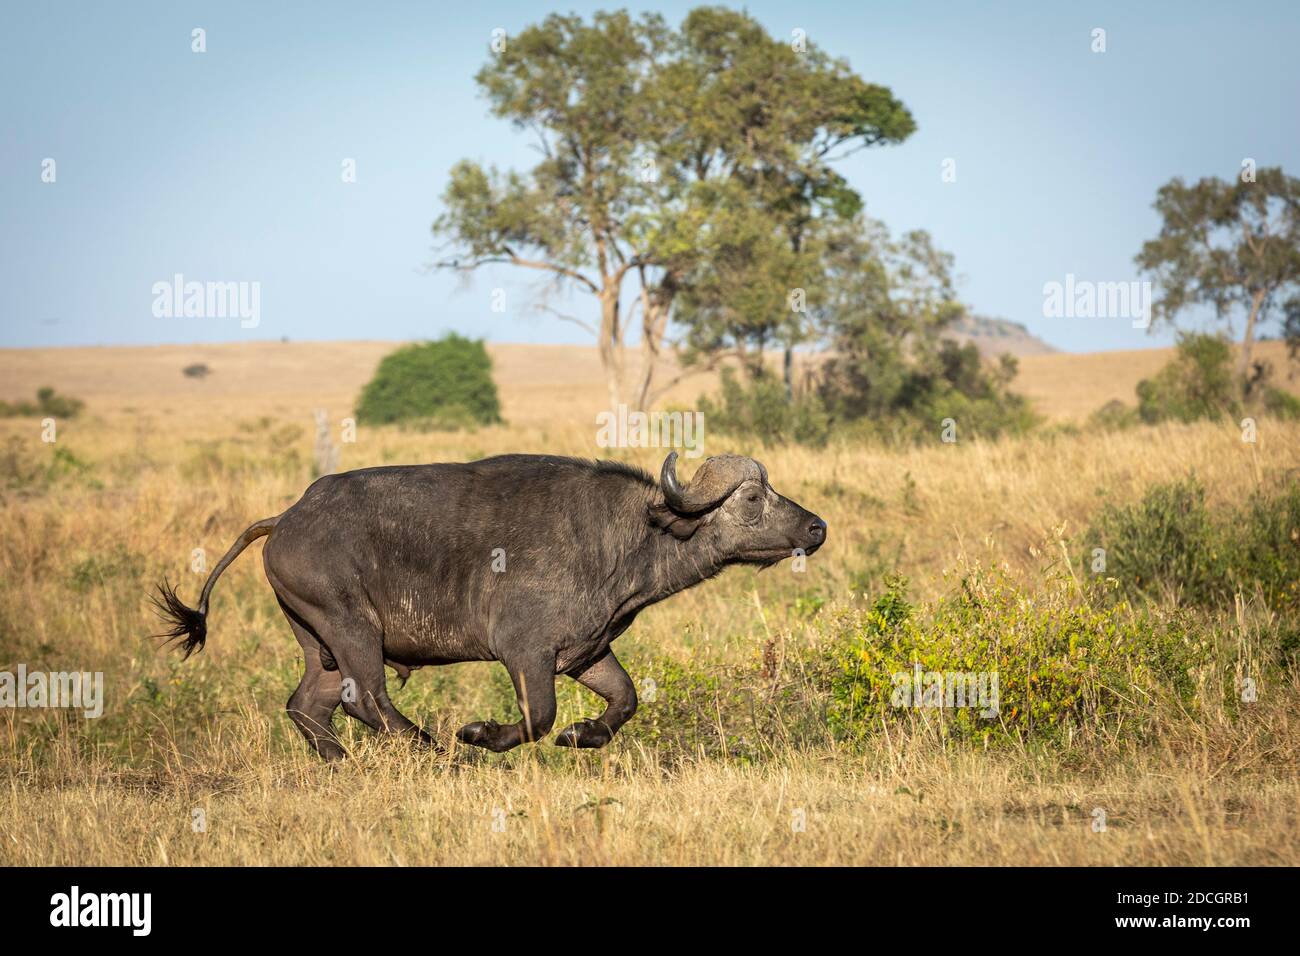 African male buffalo running at full speed in the grassy plains of Masai Mara in Kenya Stock Photo